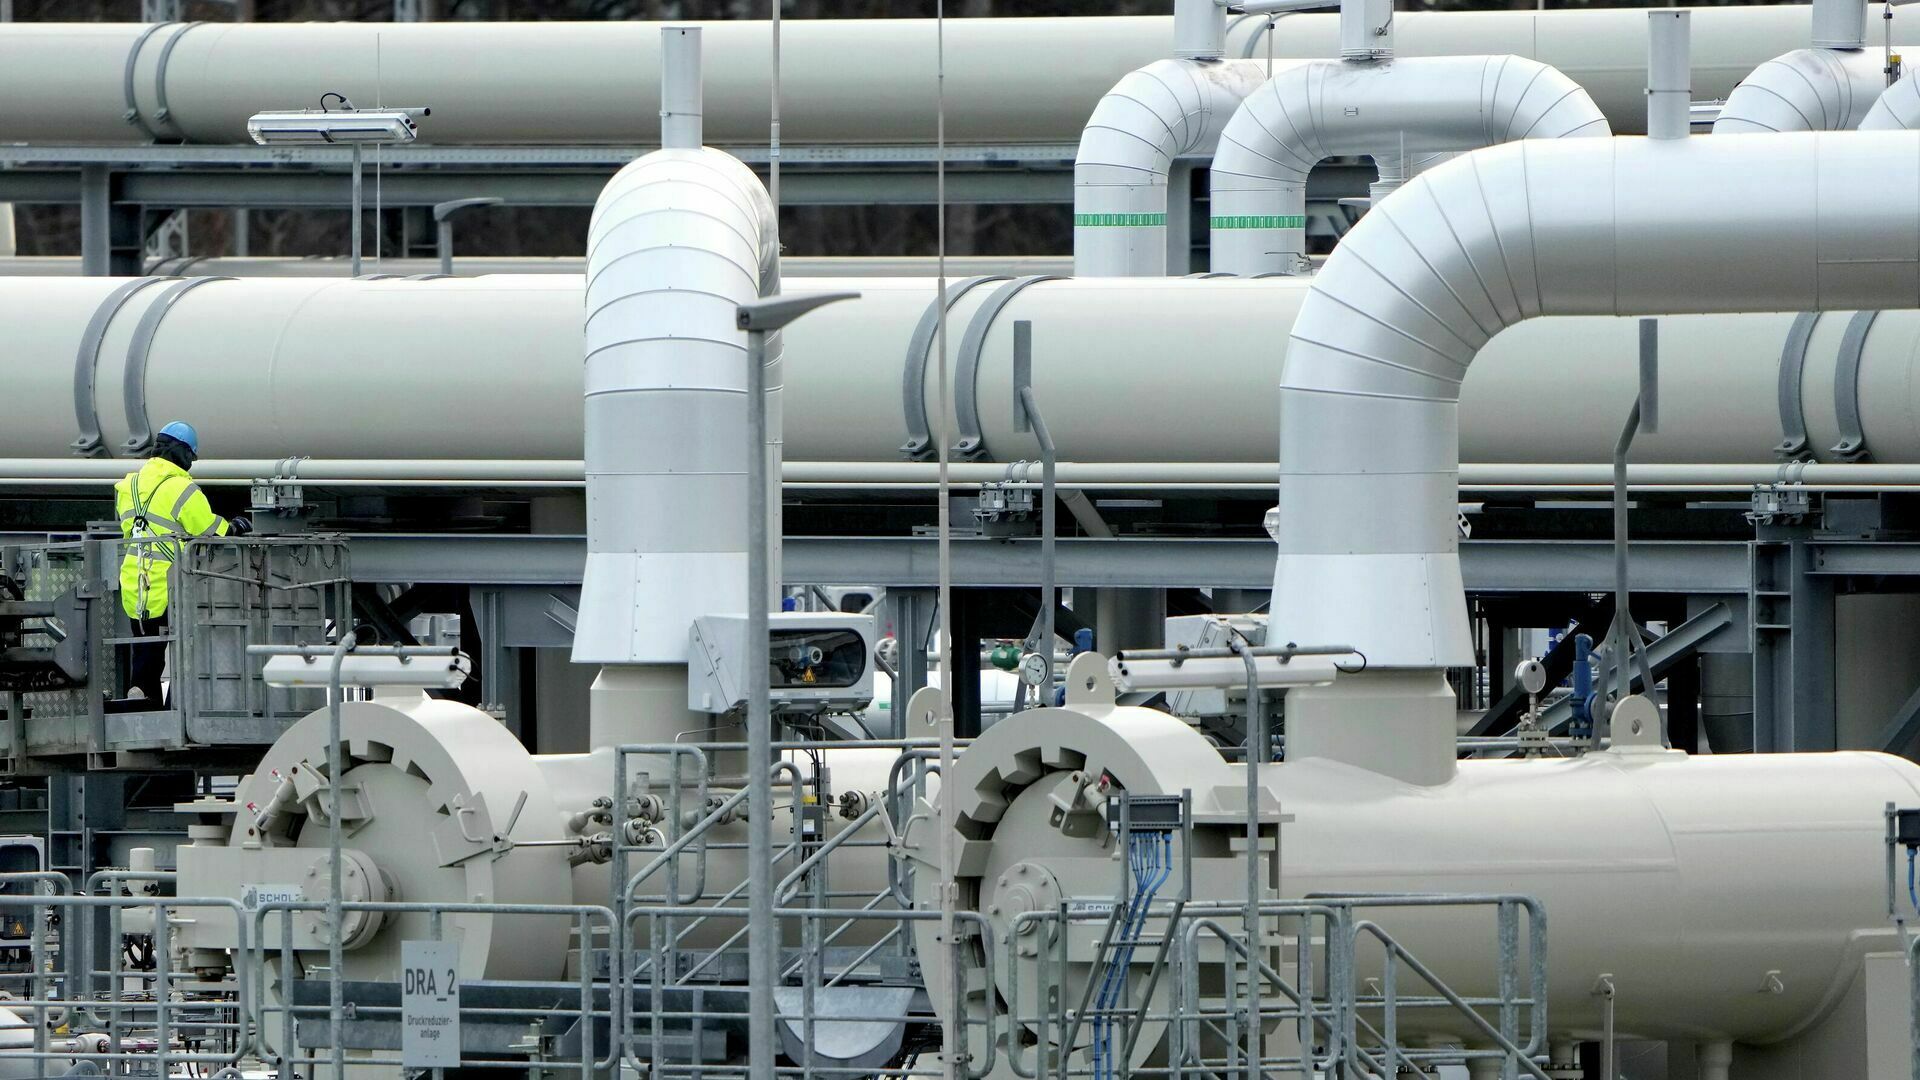 Fitch called the period required by the EU to replace Russian gas